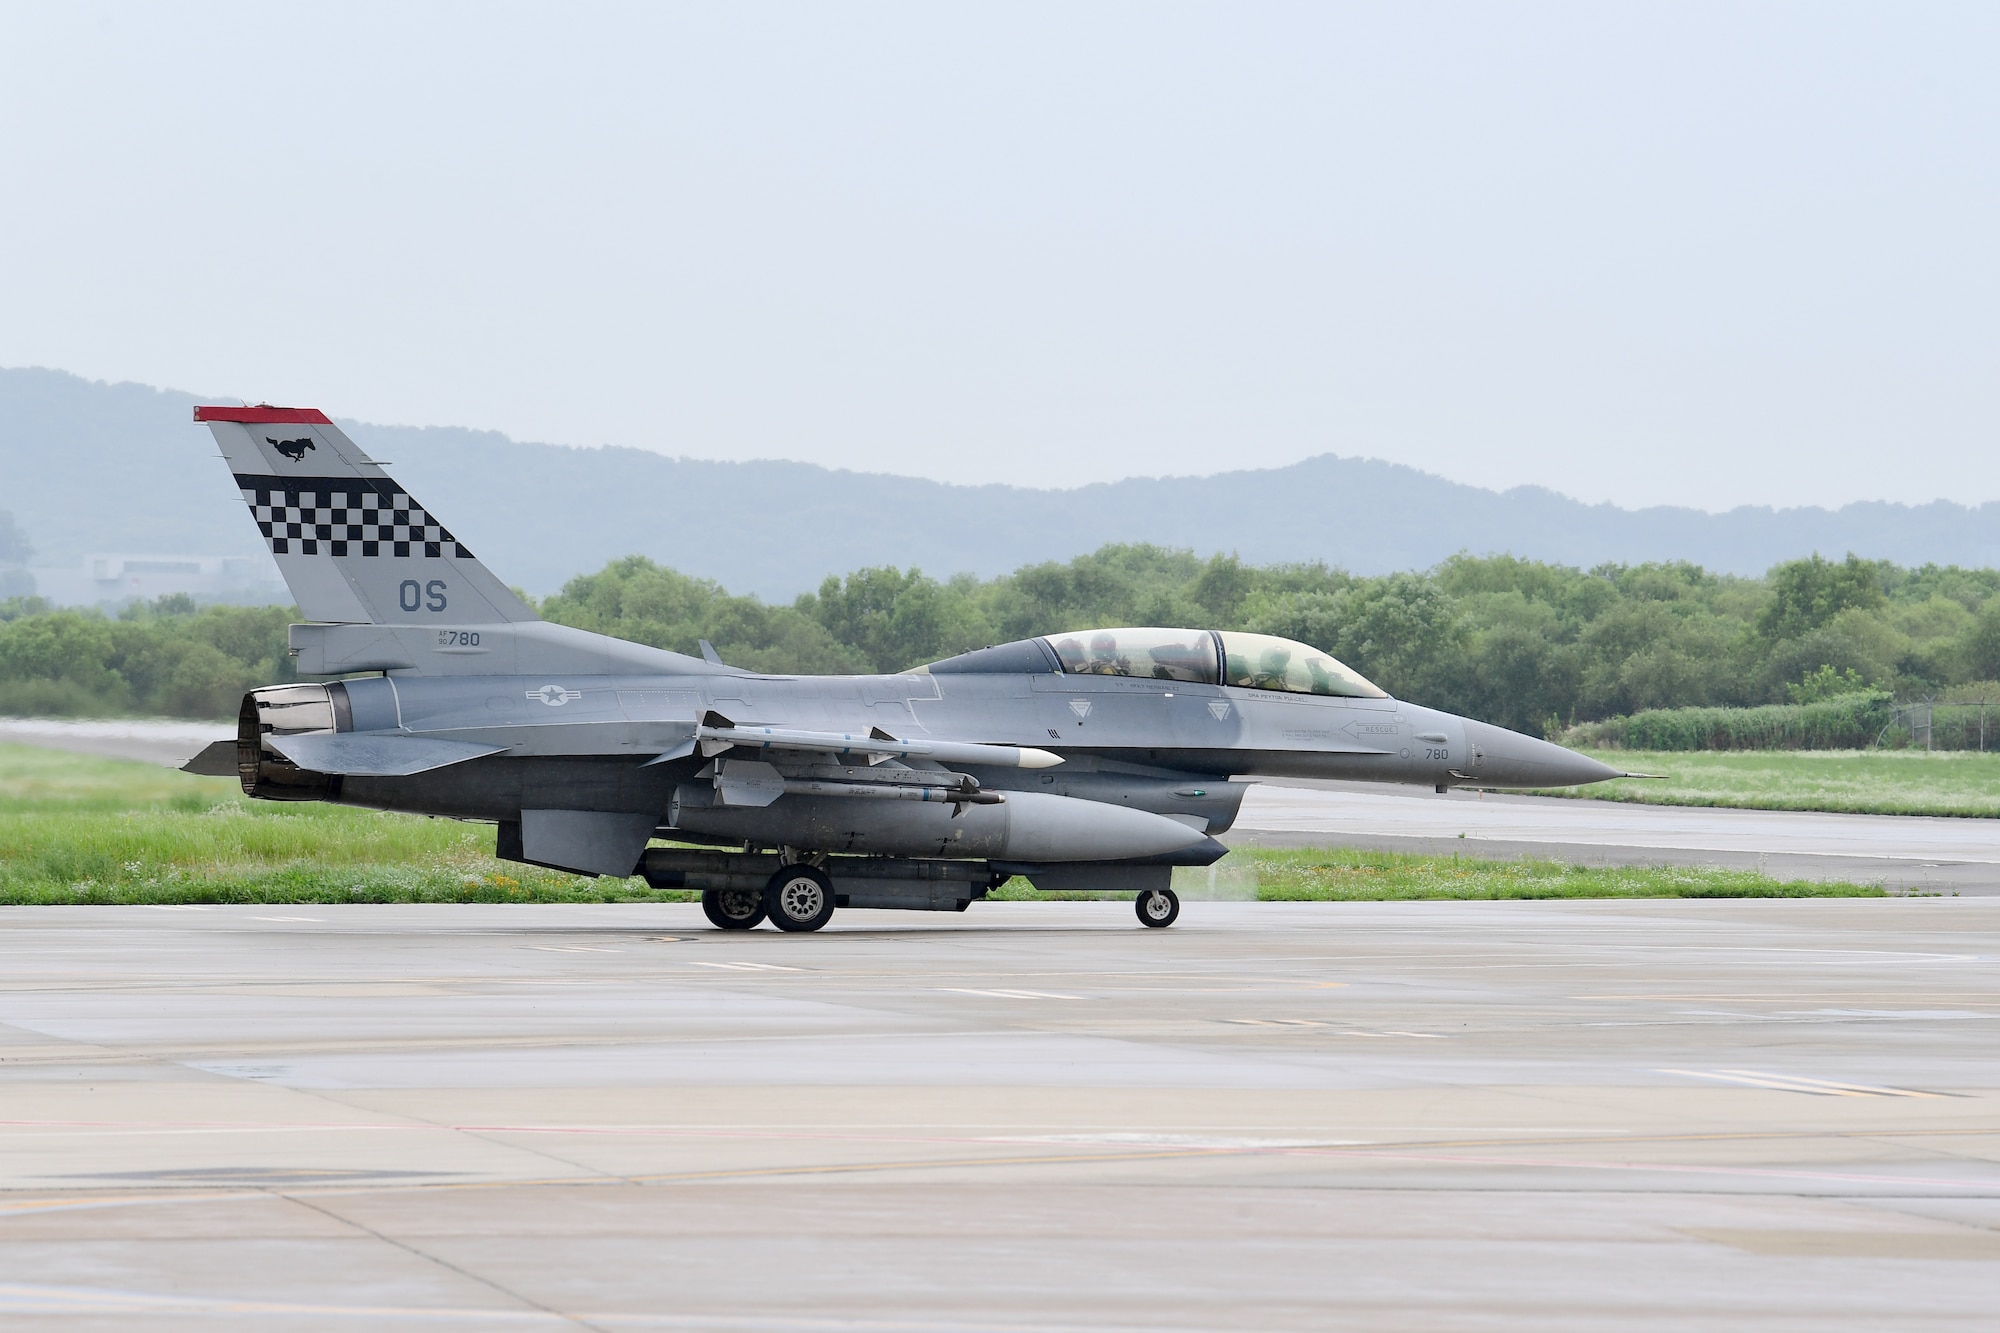 Capt. Louis Bloom, 36th Fighter Squadron F-16 pilot, left, and Maj. Chris Ng, 51st Medical Operations Squadron general surgeon, taxi out to the runway at Osan Air Base, Republic of Korea, July 28, 2020.  Both hailing from Randolph, Massachusetts, the Randolph High School graduates continued their friendship while attending the United States Air Force Academy. Rekindling at Osan Air Base, their familiarization flight plans were initially derailed due to Bloom’s motorcycle accident. Ng’s medical expertise was instrumental to Bloom’s full and speedy recovery during the surgical and rehabilitation process, ultimately resulting in finally flying together. (U.S. Air Force photo by Senior Airman Noah Sudolcan)